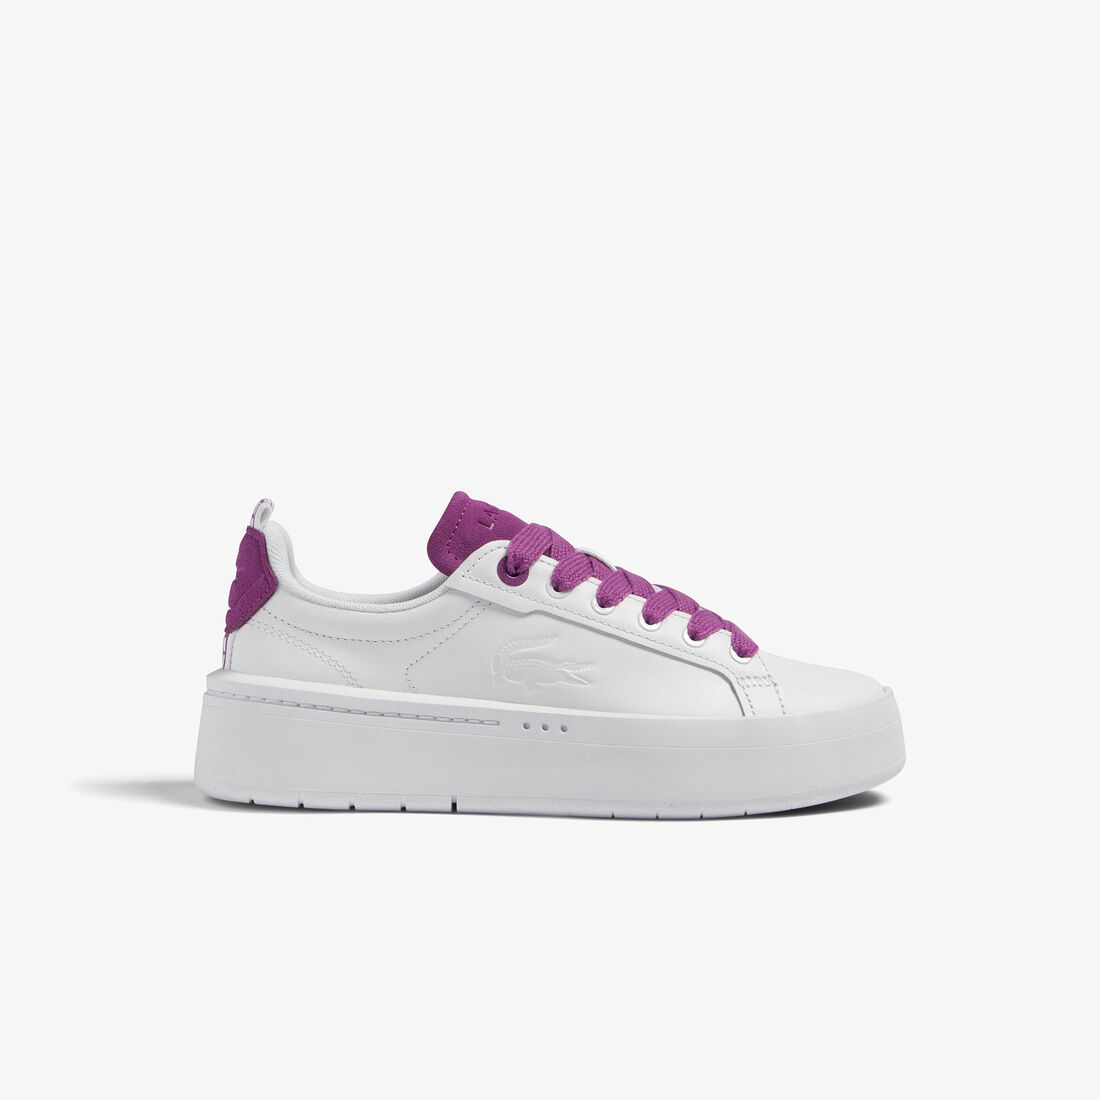 Women's Lacoste Carnaby Platform Leather Trainers